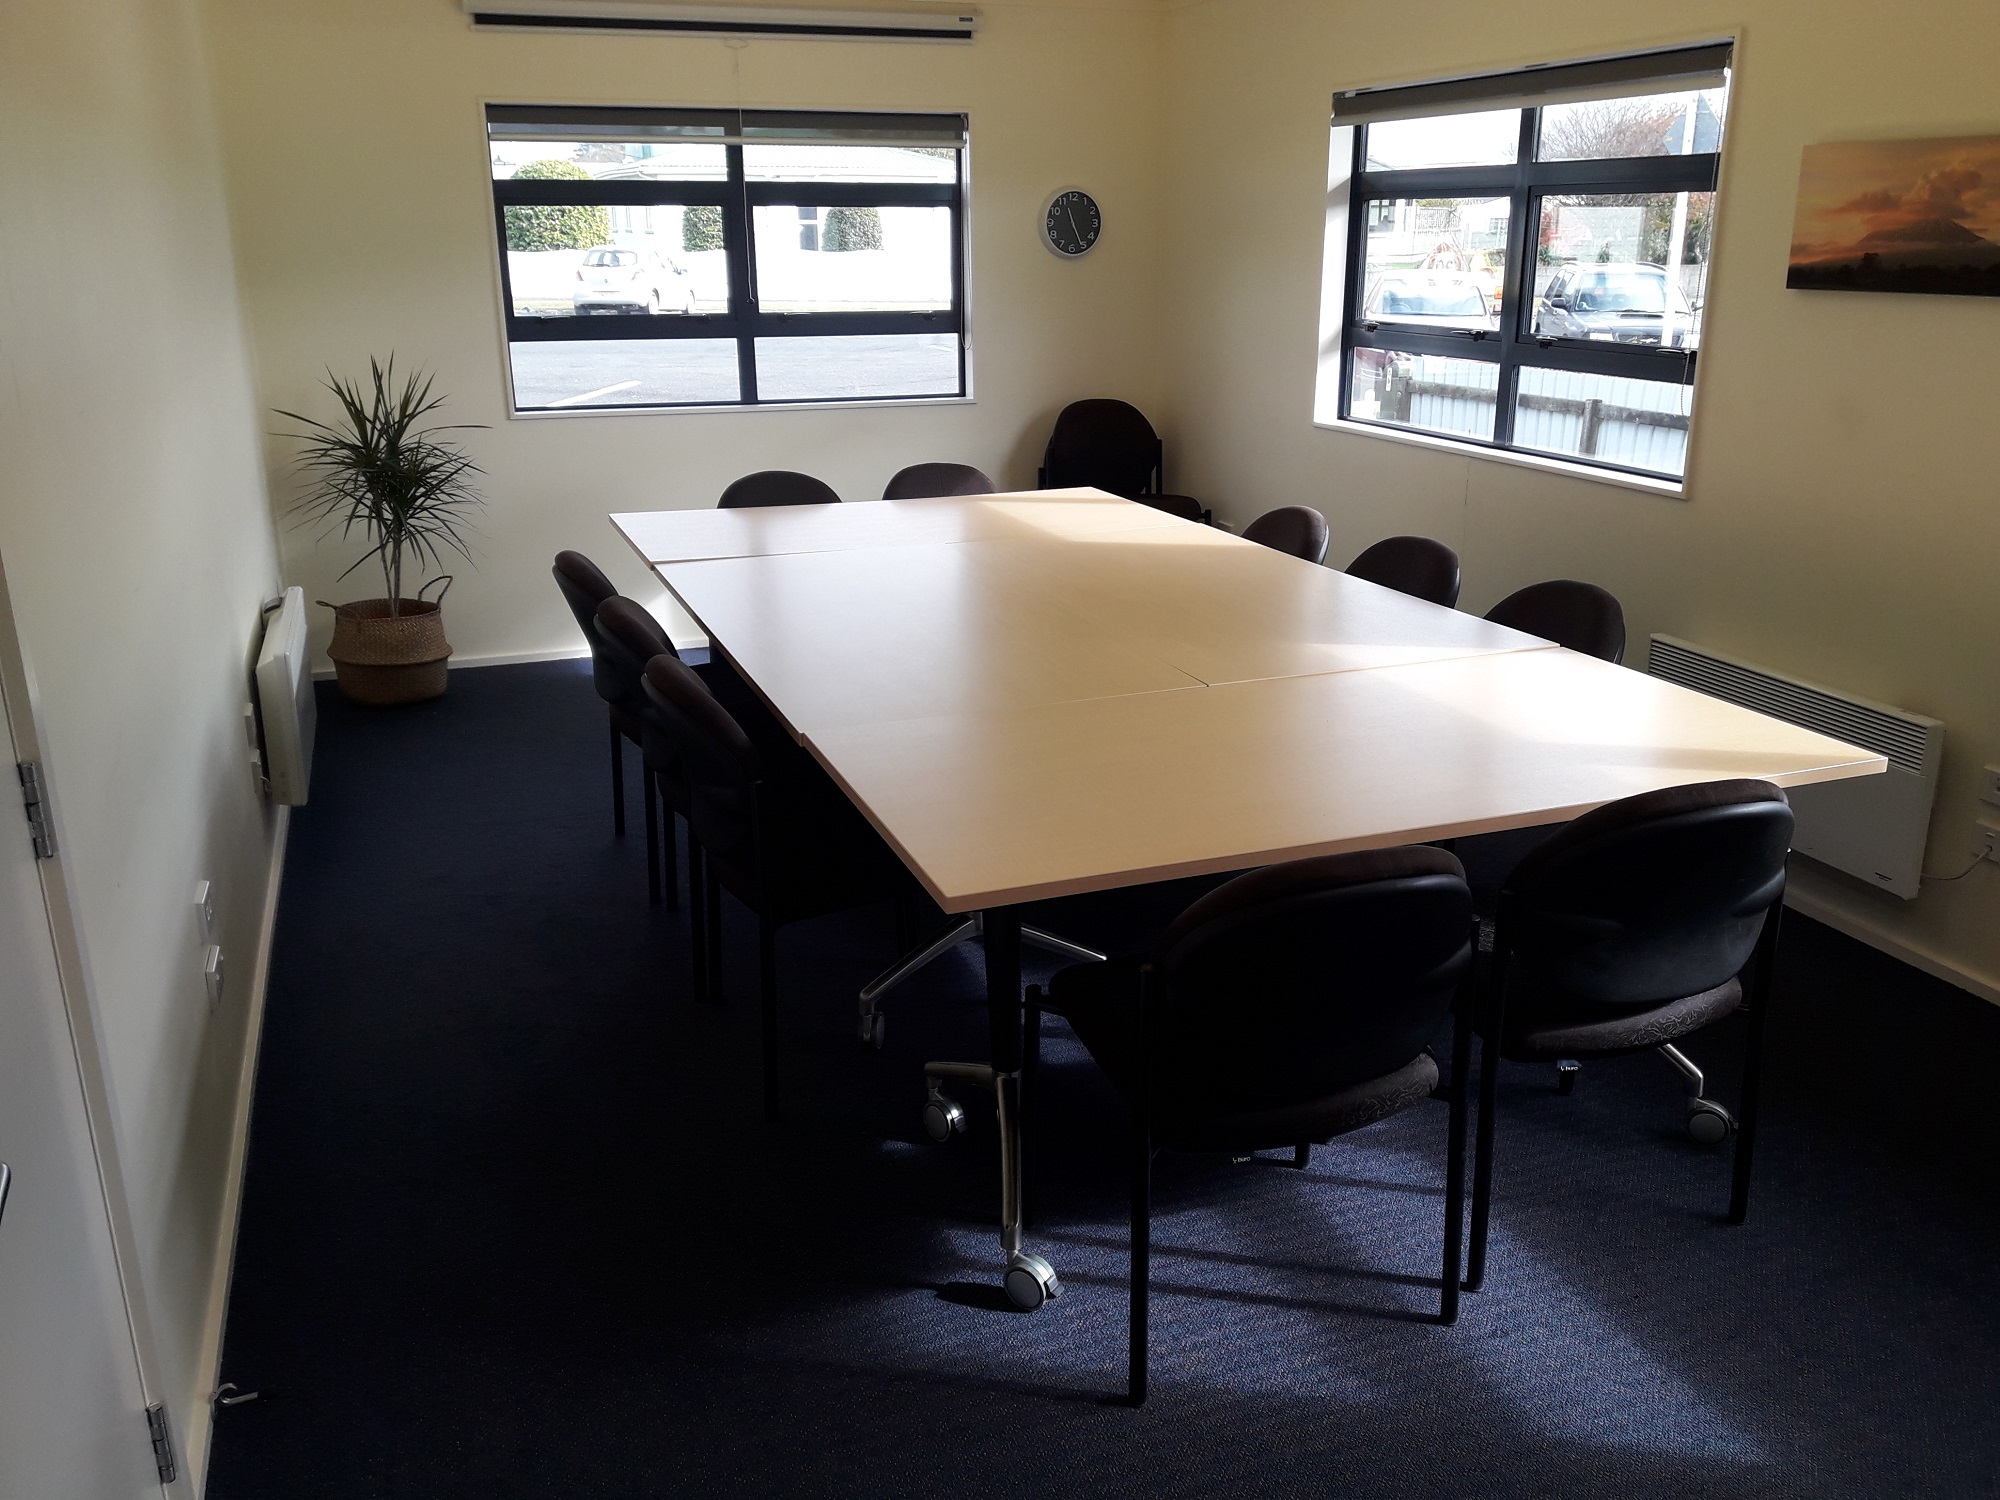 Photo of the Stratford Community House boardroom